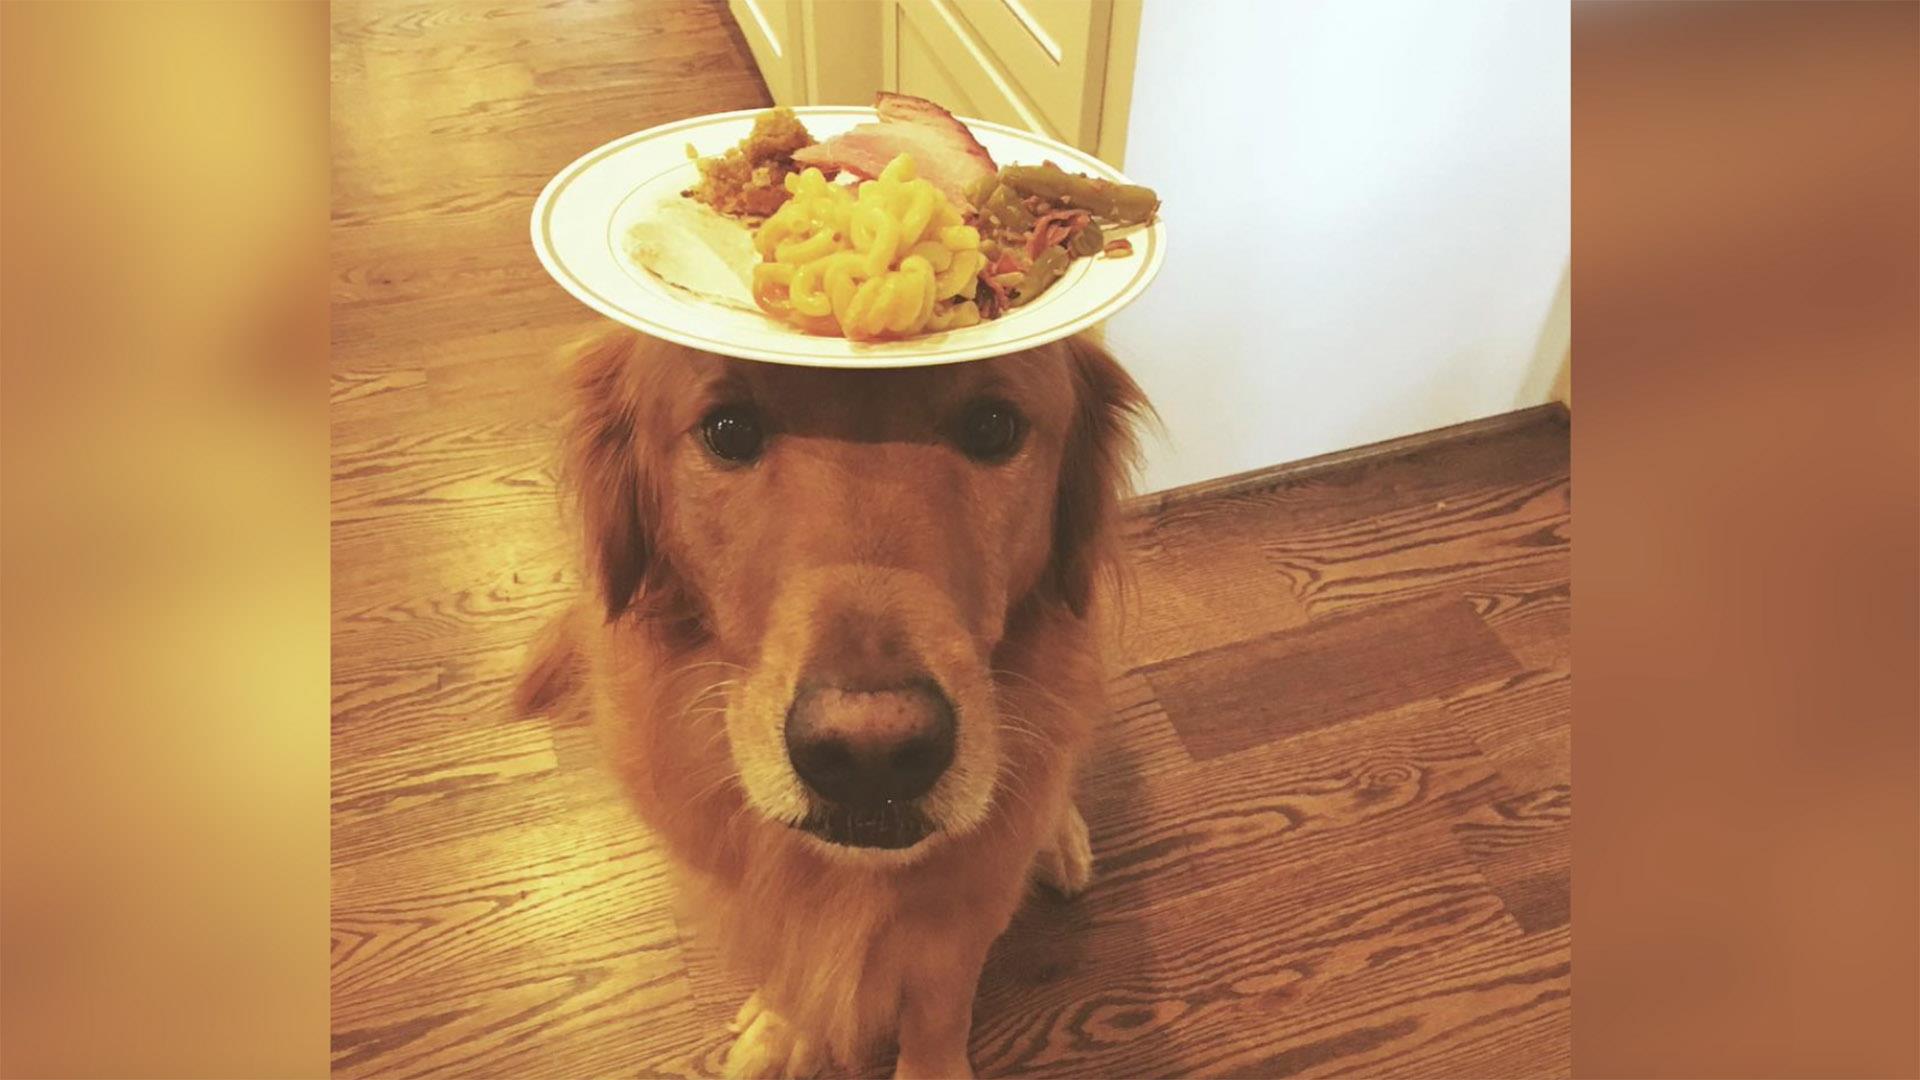 Unbelievable dog can balance anything on his head or nose - TODAY.com